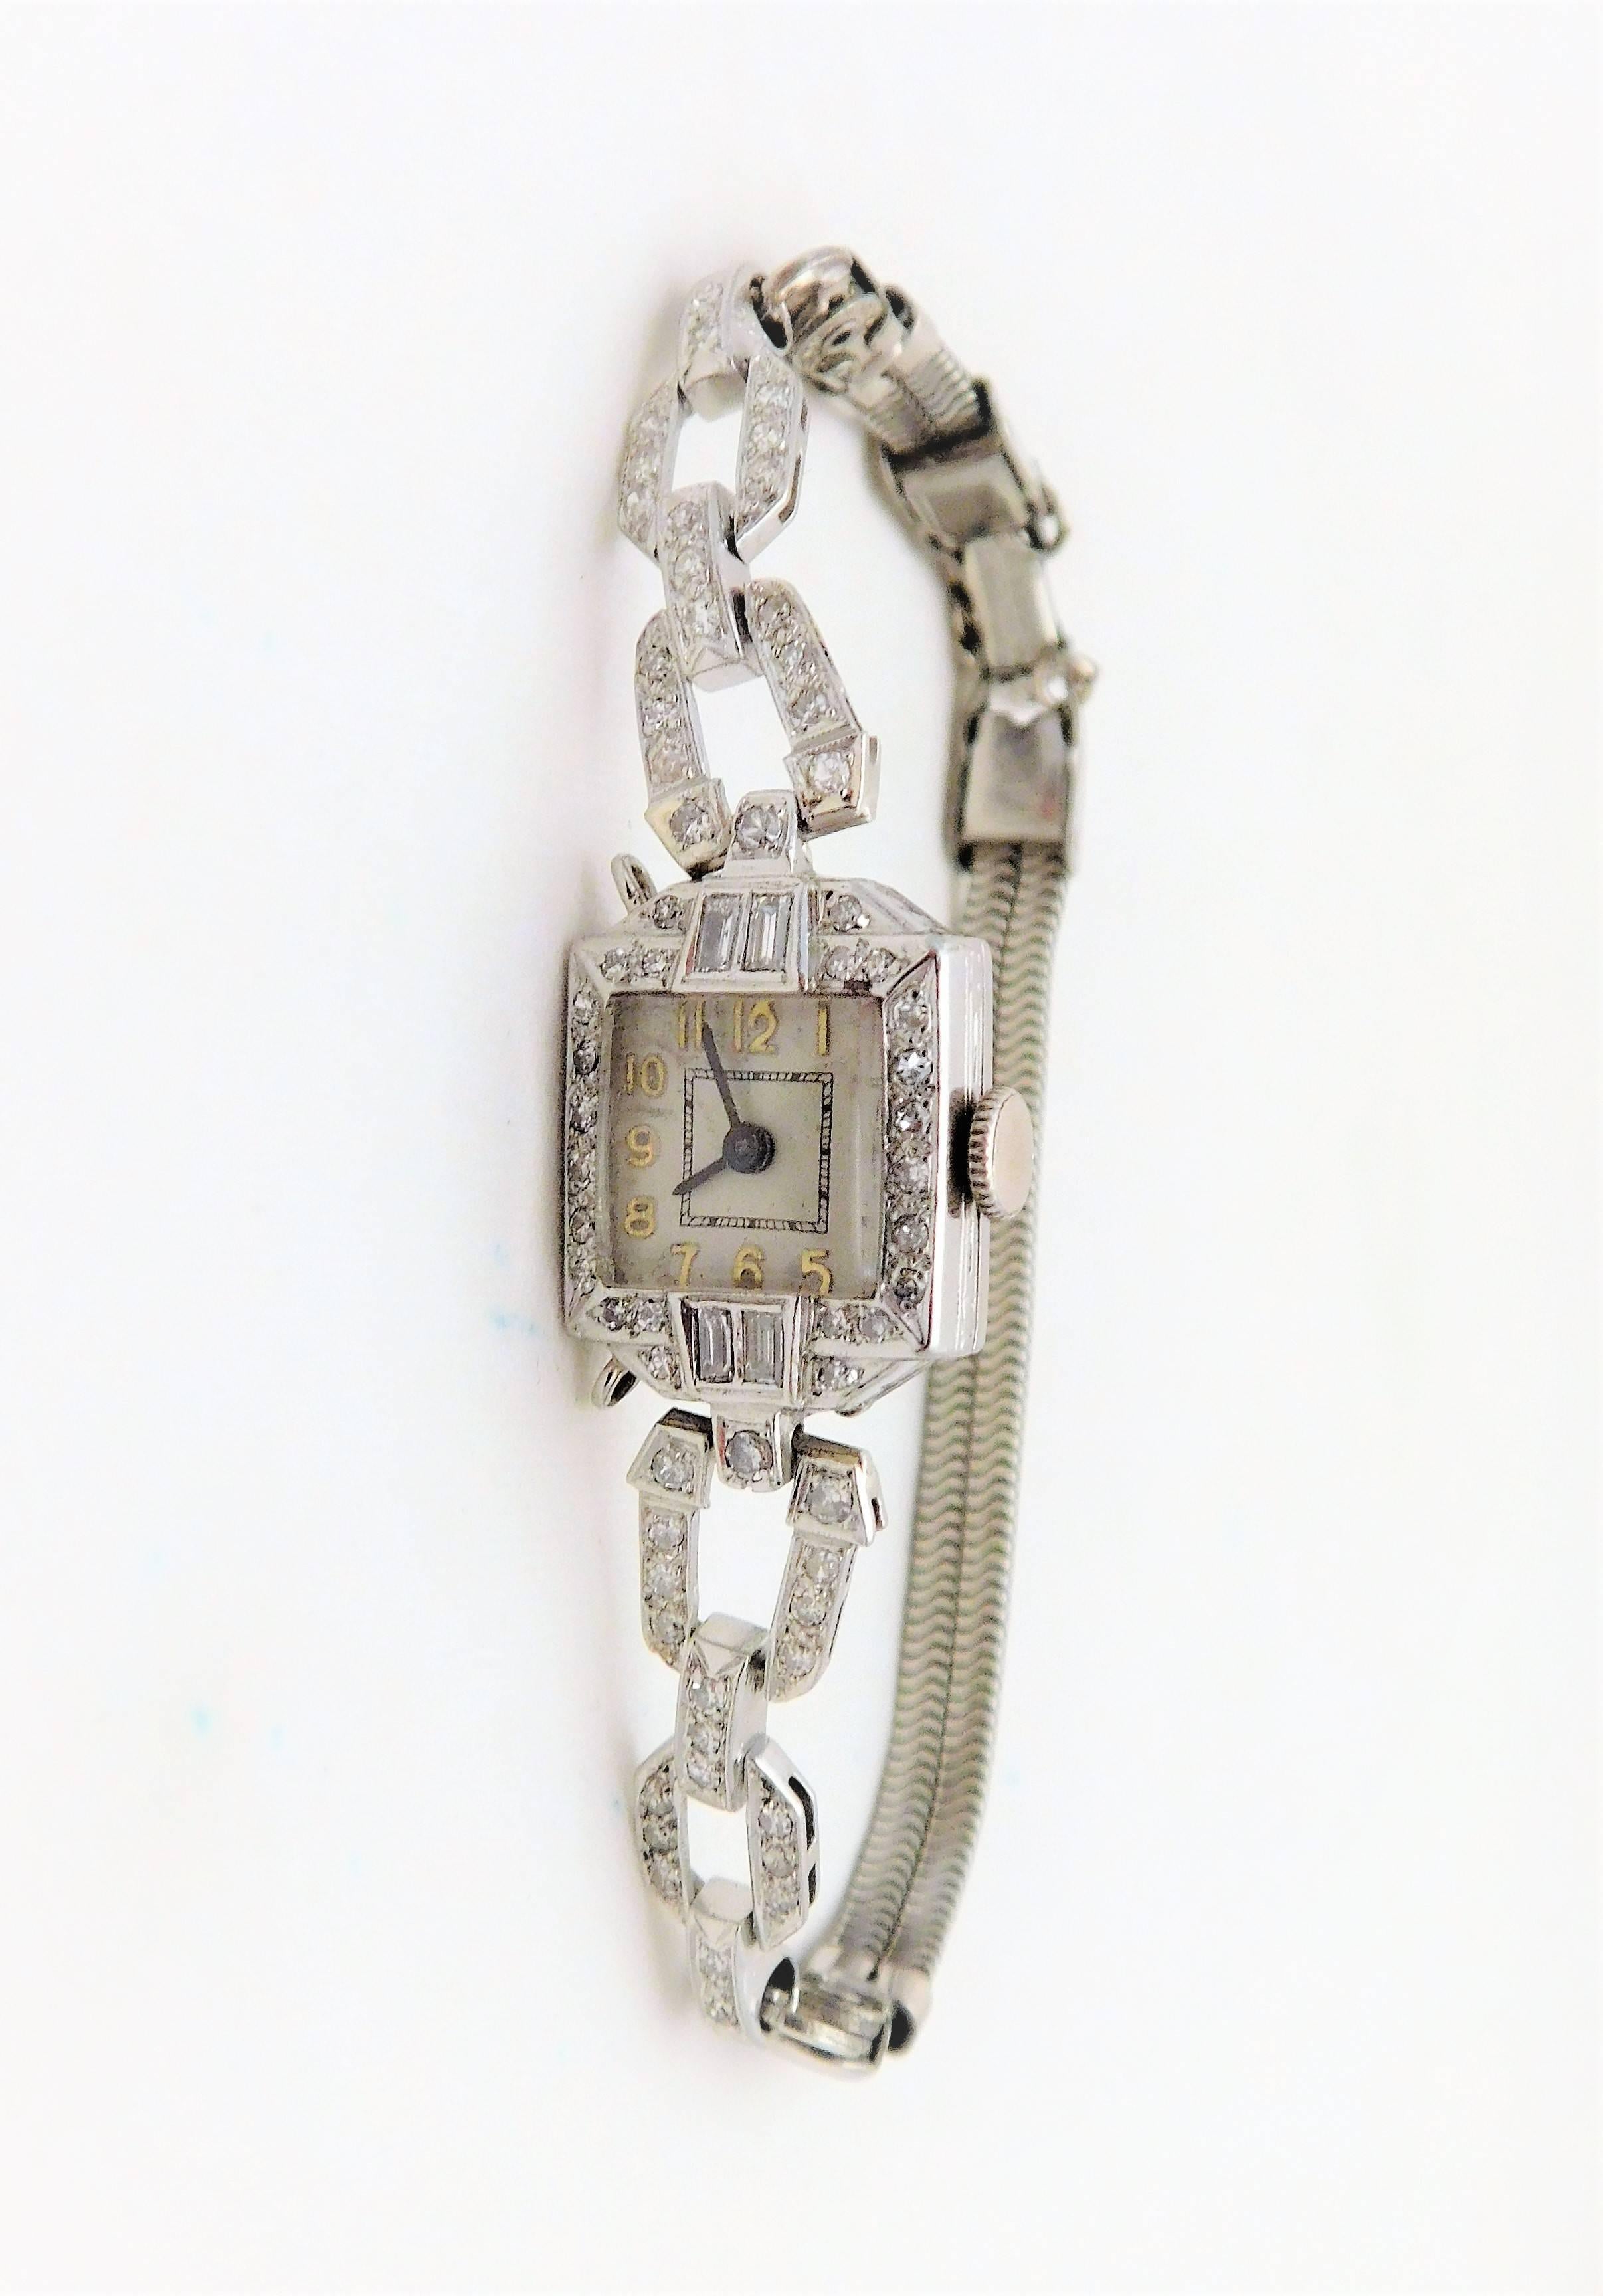 Art Deco S. Kocher Ladies’ Luxurious Diamond Wristwatch

An antique watch collectors dream.  From a luxurious New Orleans estate.  Circa 1912.  This very rare Art Deco antique ladies’ wristwatch was crafted by the Swiss S. Kocher watch company.  It